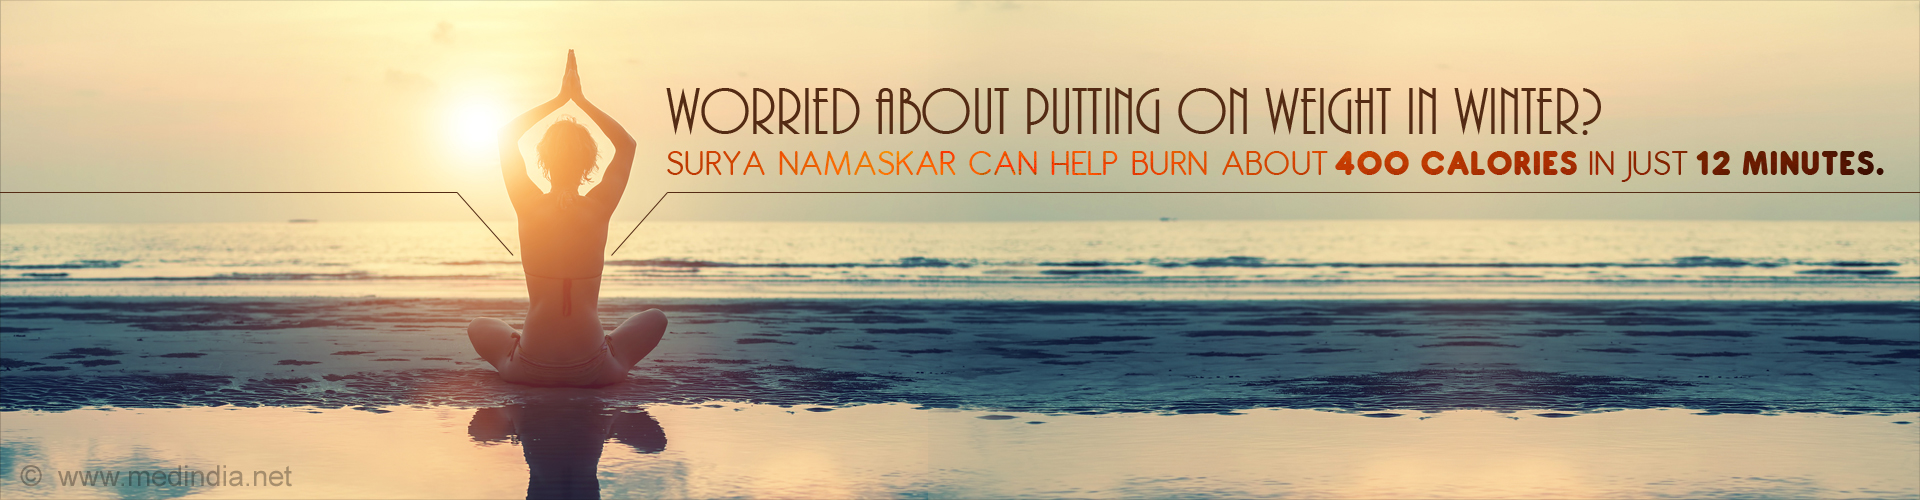 Worried about putting on weight in winter? Surya namaskar can help burn about 400 calories in just 12 minutes.